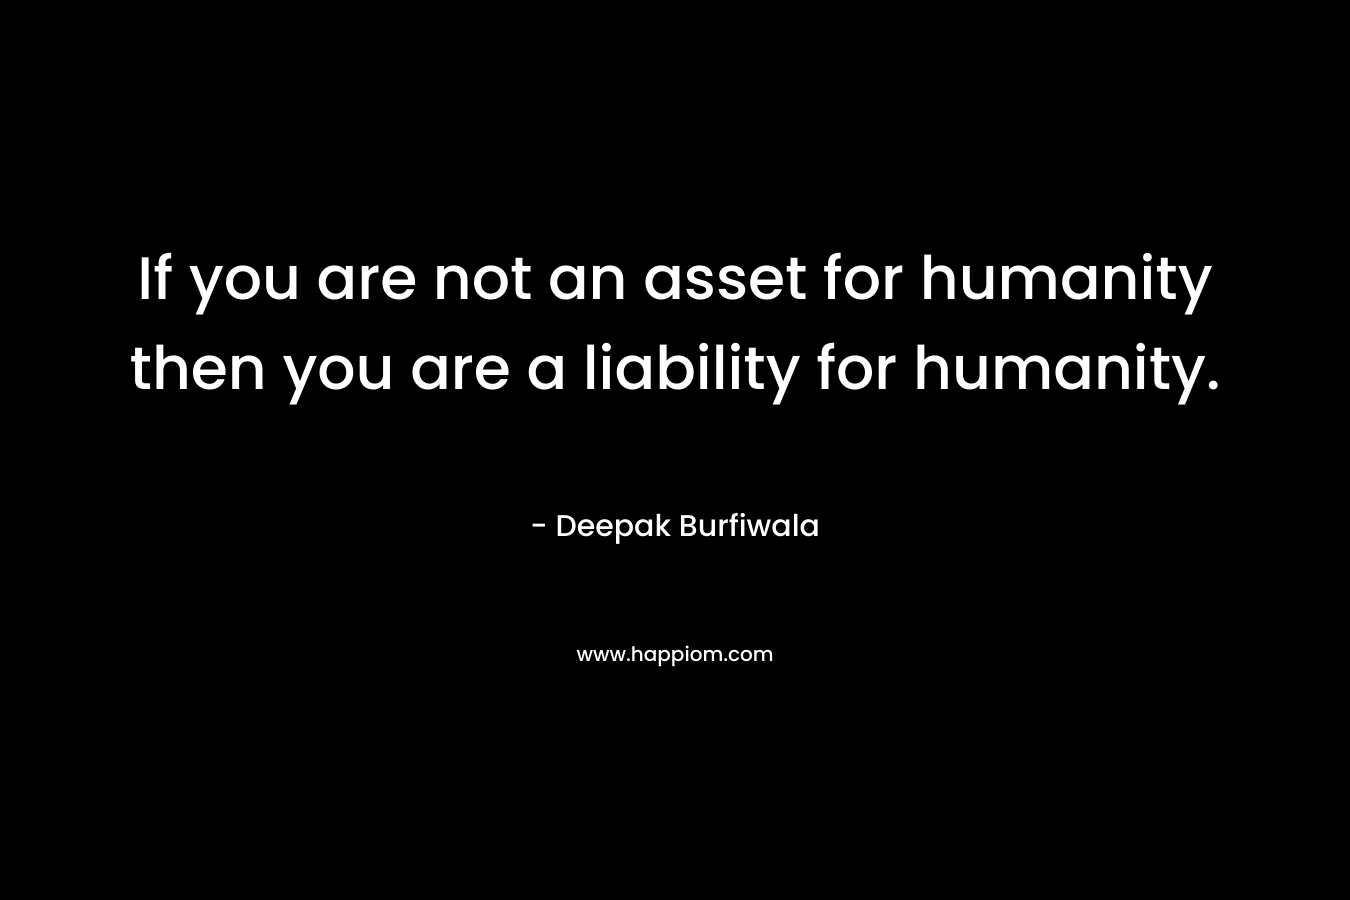 If you are not an asset for humanity then you are a liability for humanity. – Deepak Burfiwala